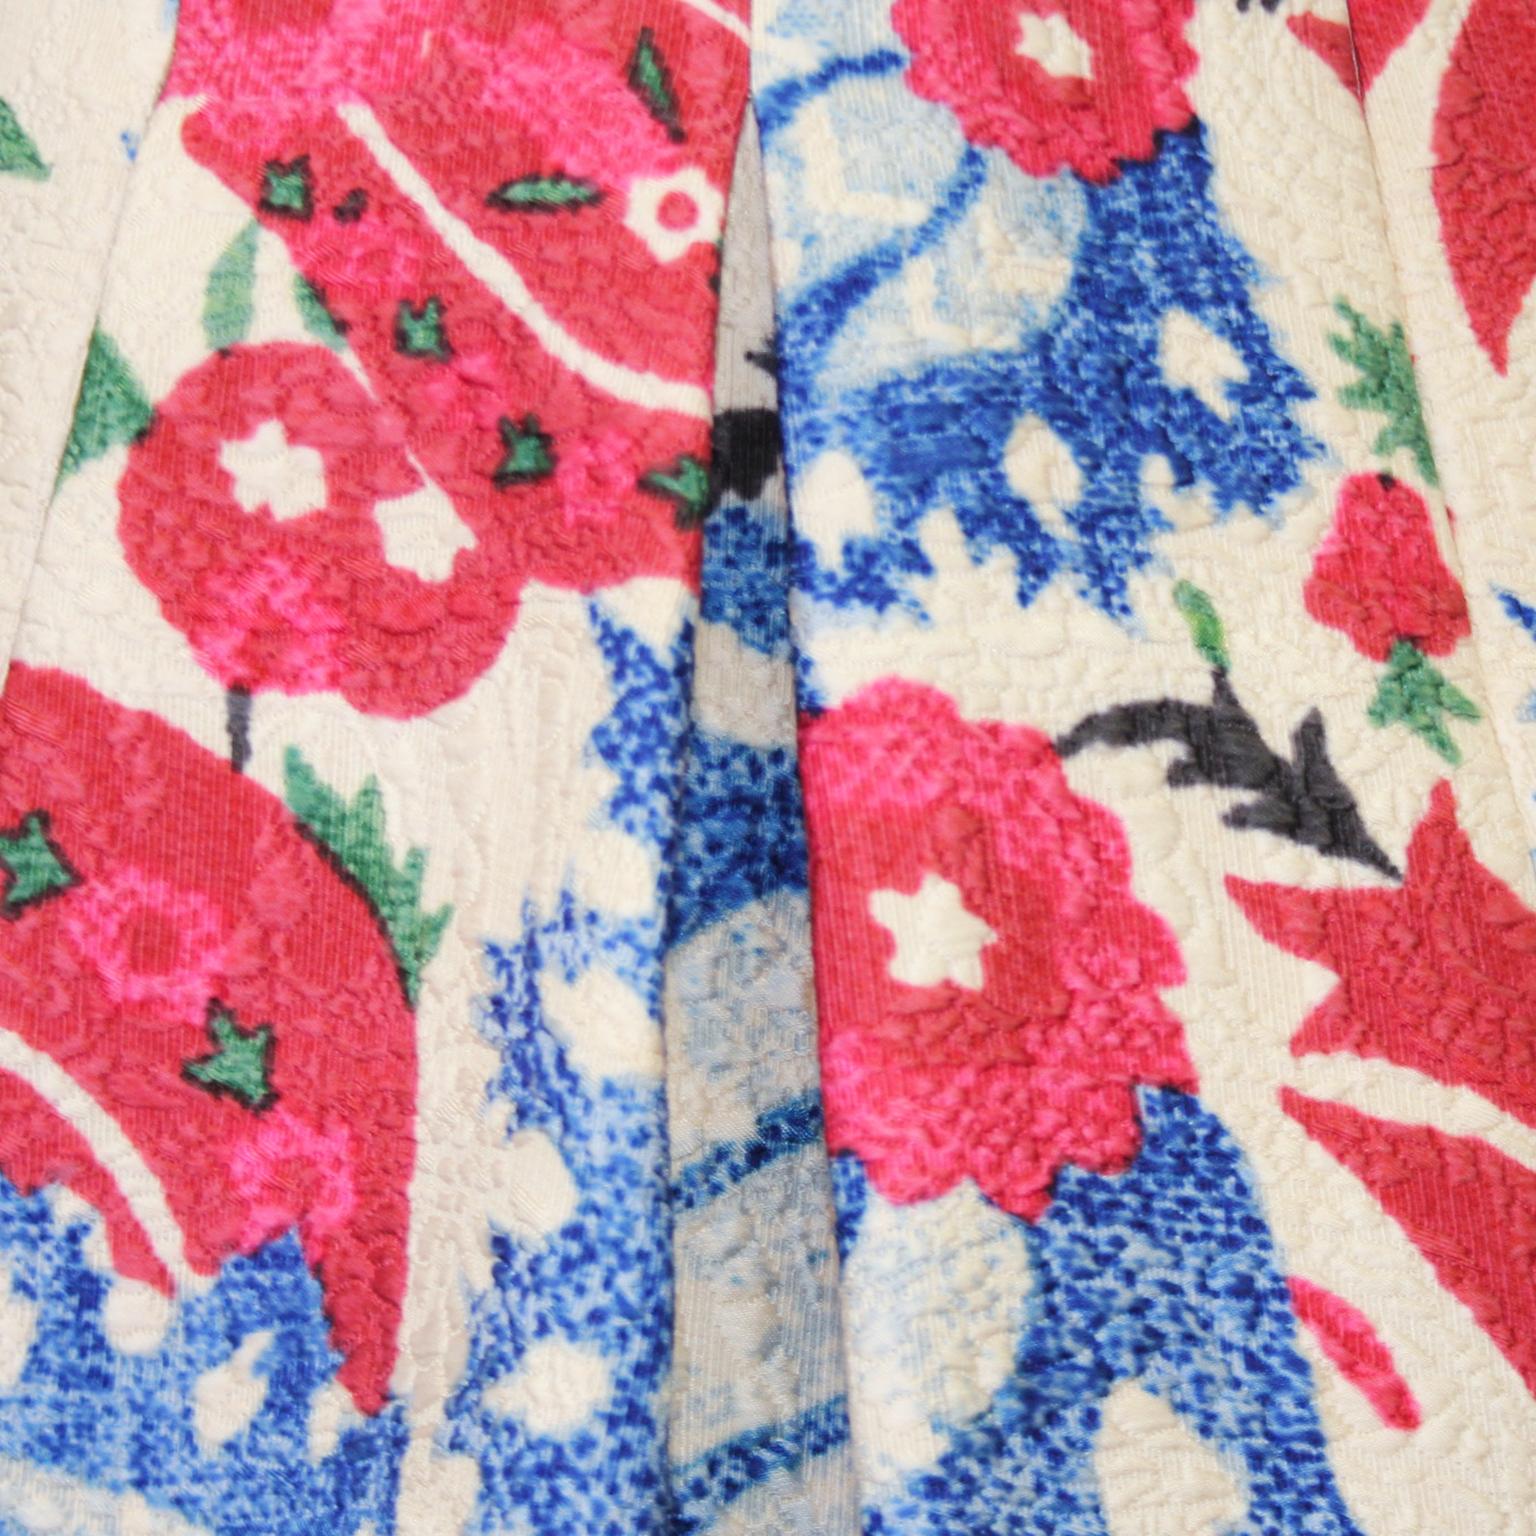 2000s Oscar de la Renta Red and Blue Floral Print Skirt In Good Condition For Sale In Toronto, Ontario